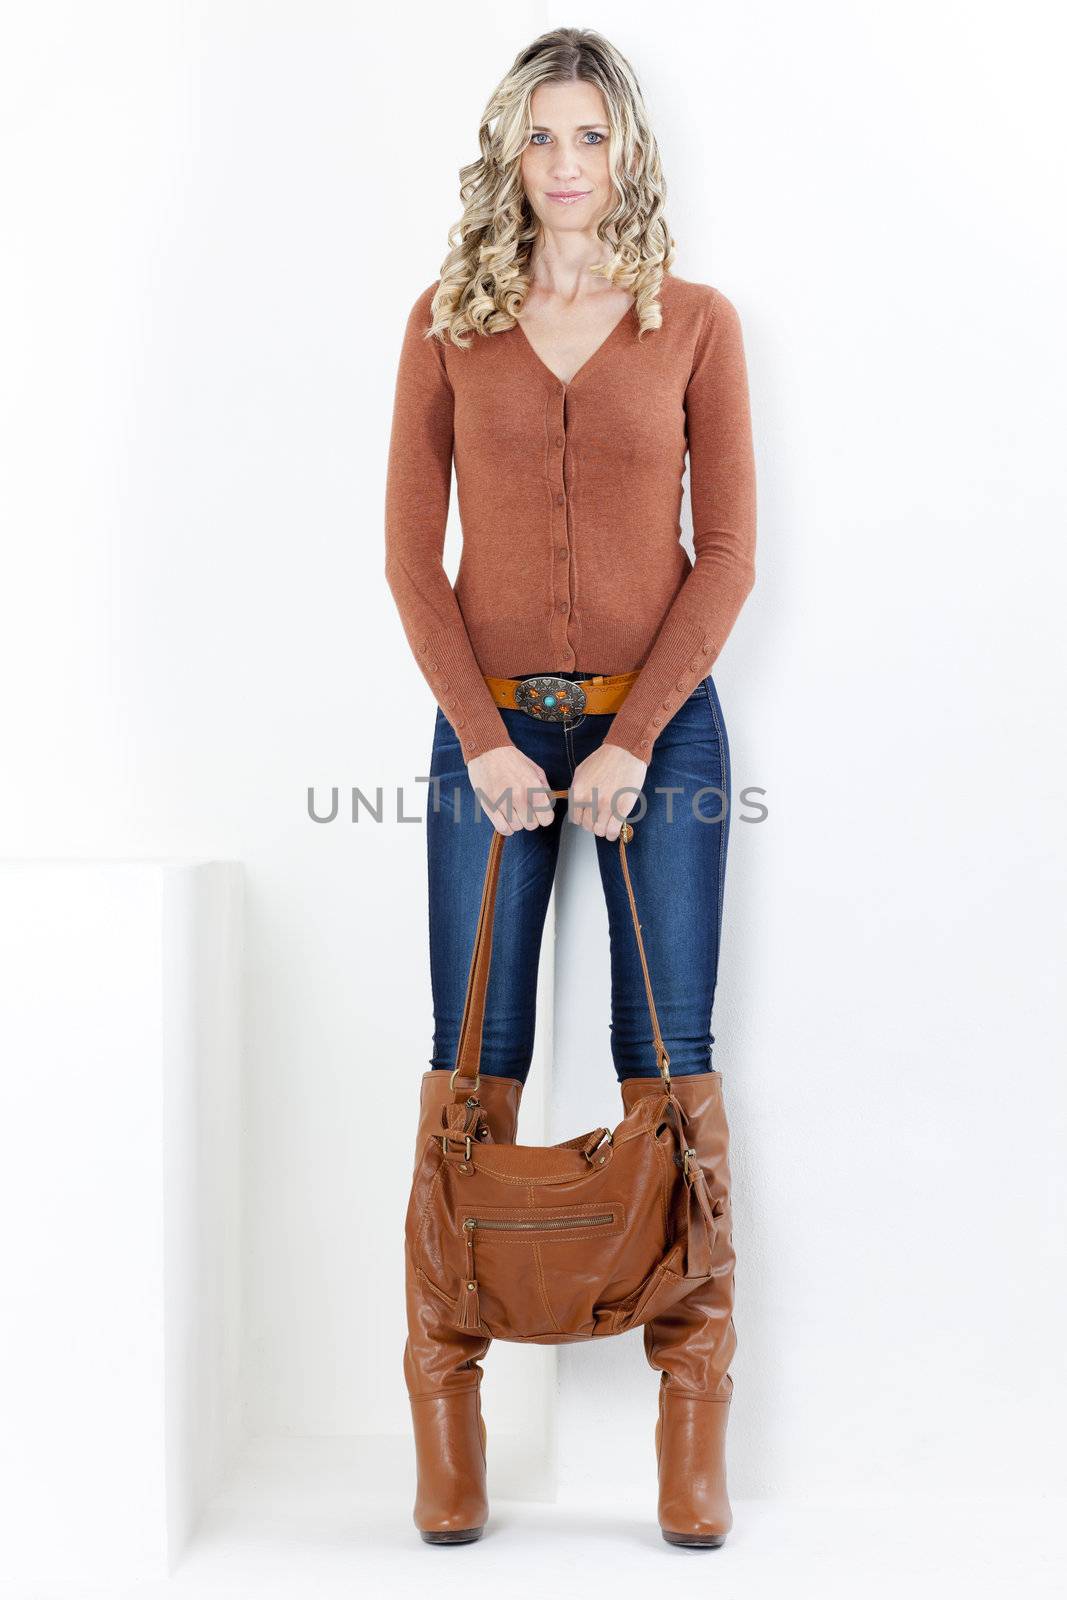 standing woman wearing fashionable brown boots with a handbag by phbcz